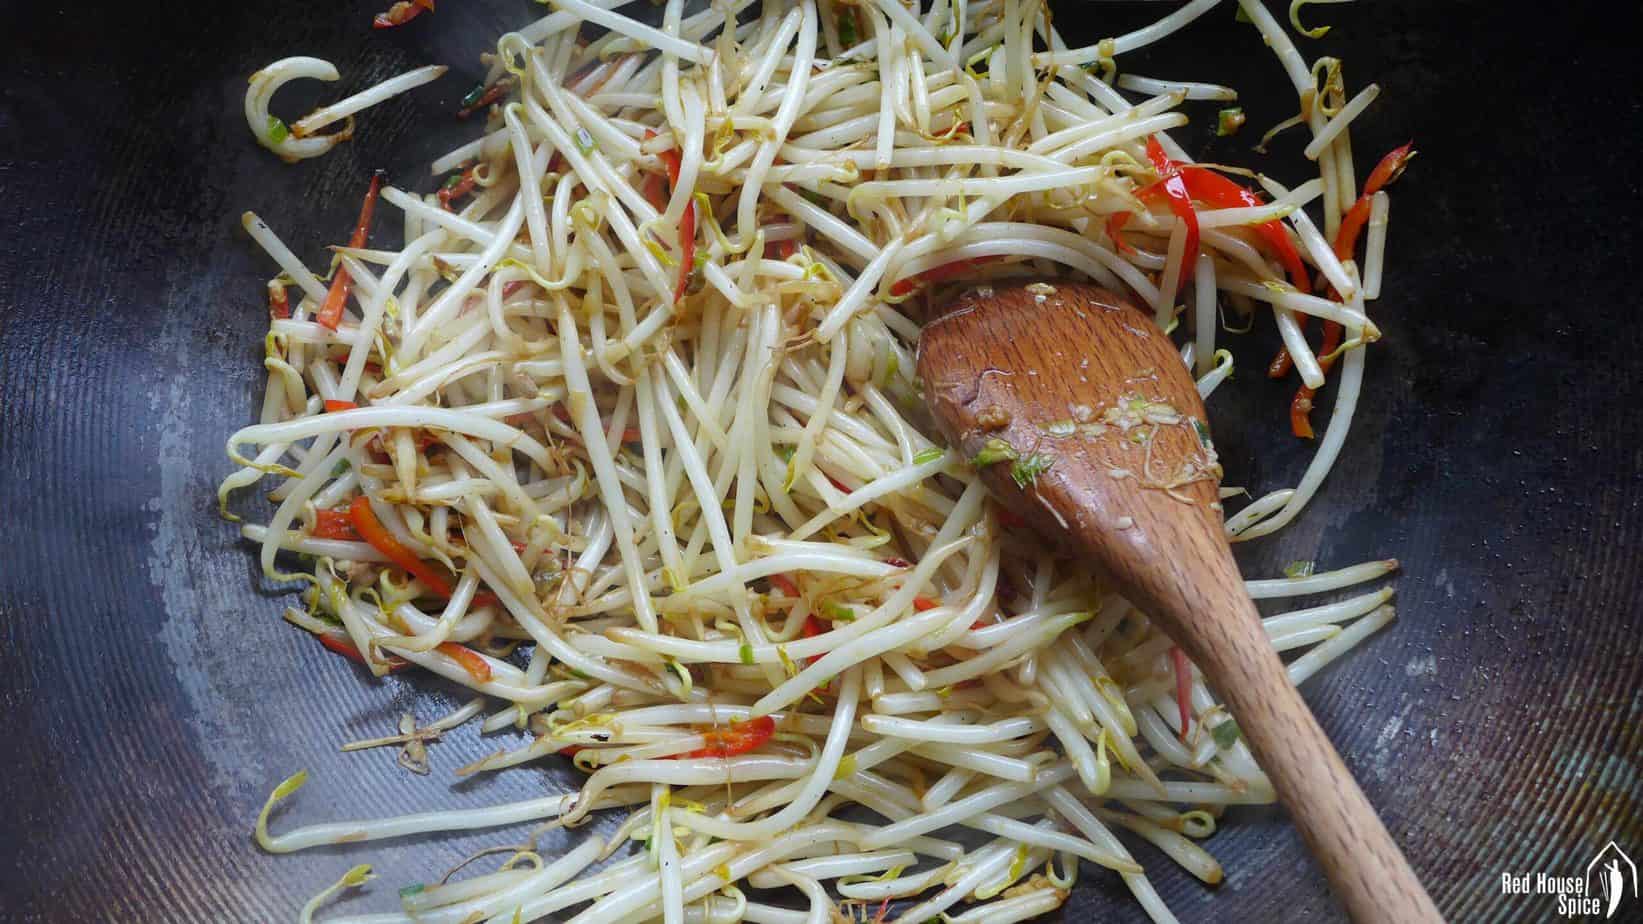 Stir-frying mung bean sprouts in a wok